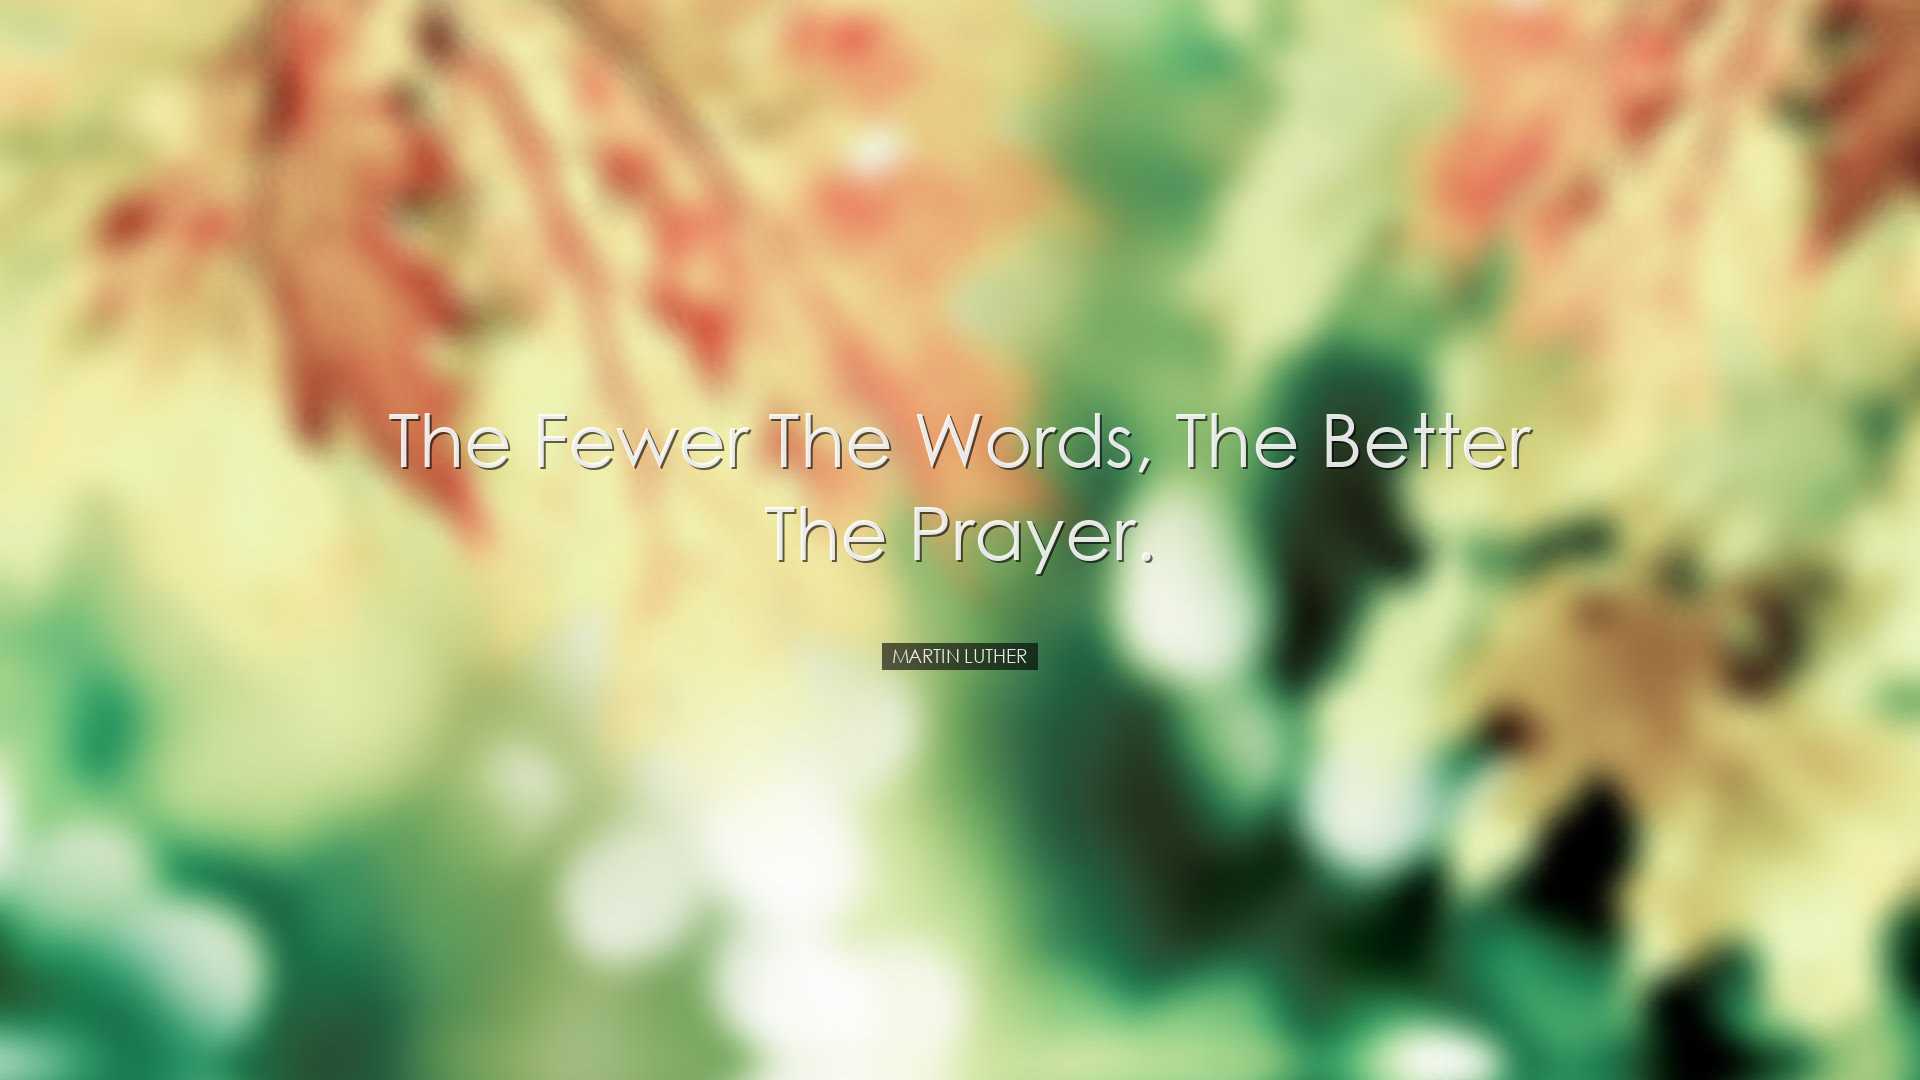 The fewer the words, the better the prayer. - Martin Luther